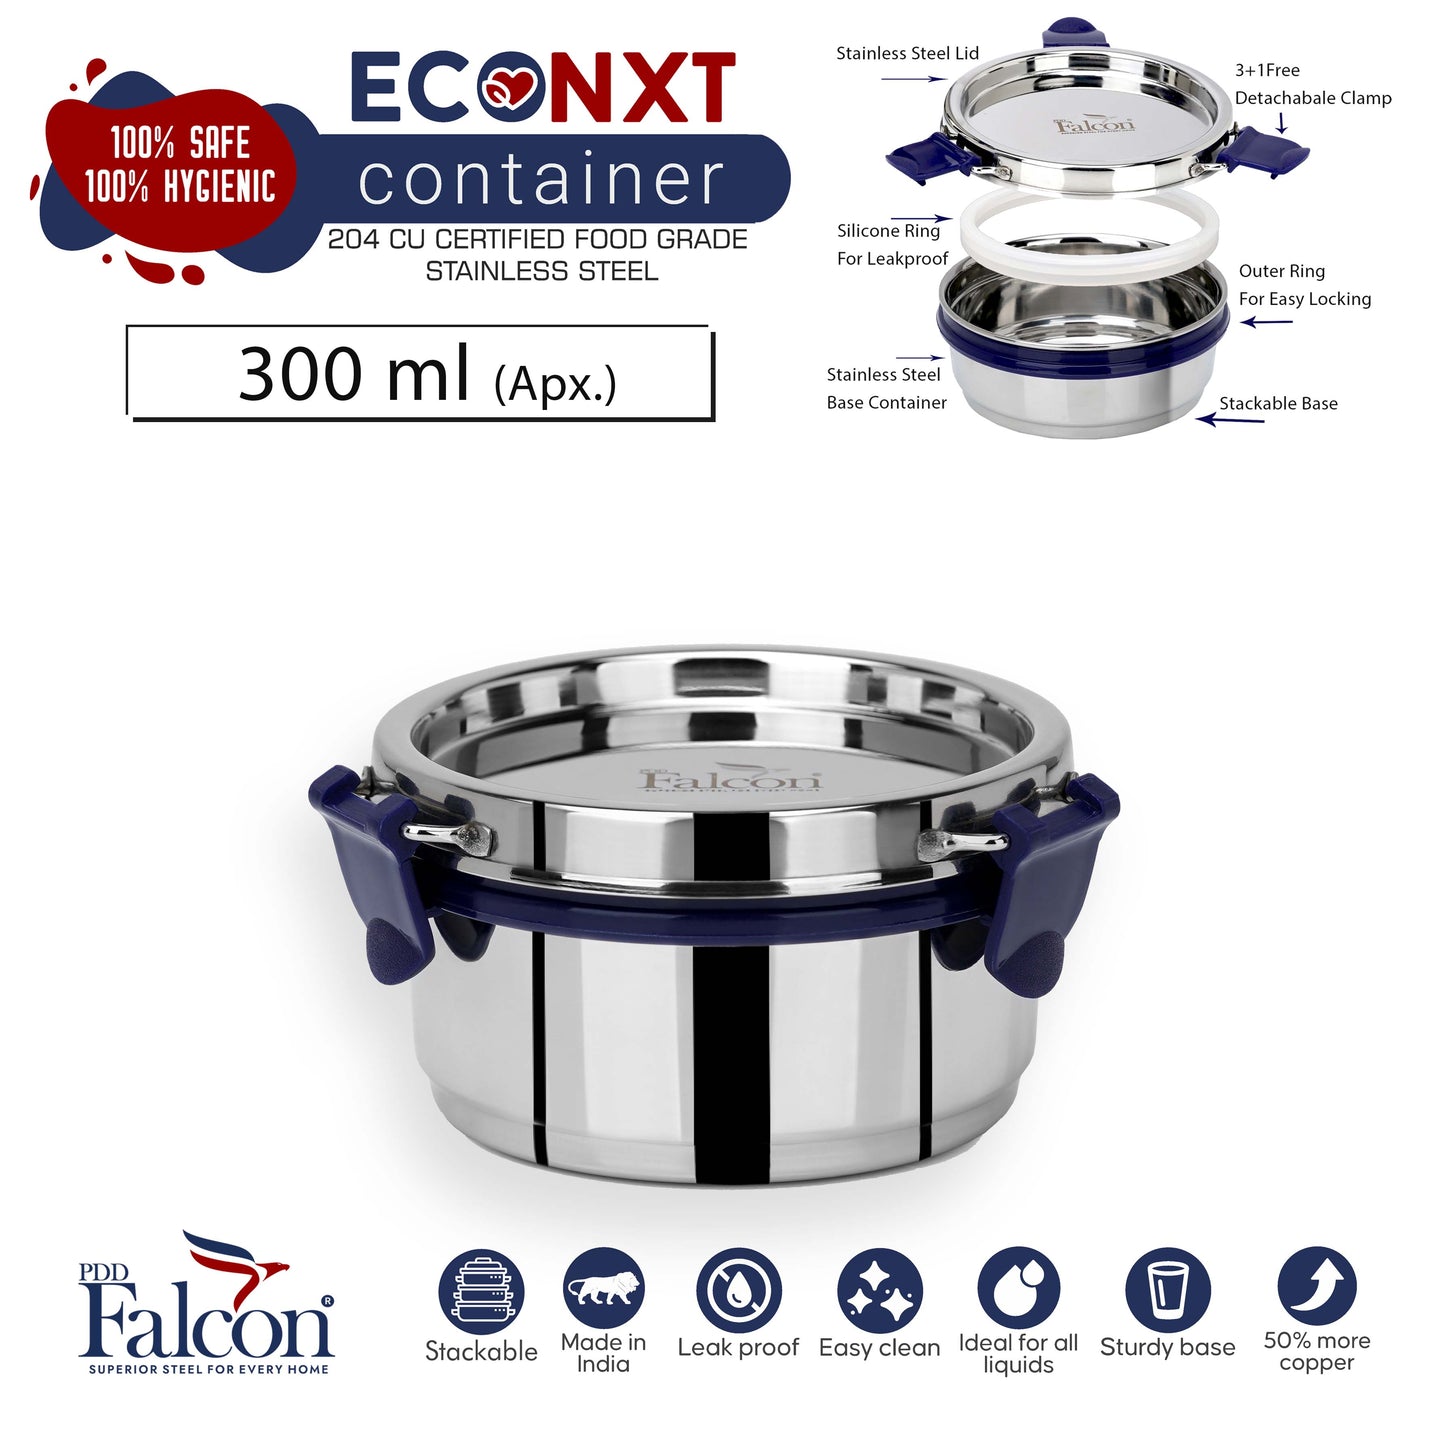 PddFalcon Stainless Steel Lunch Box EcoNxt Container 300ml